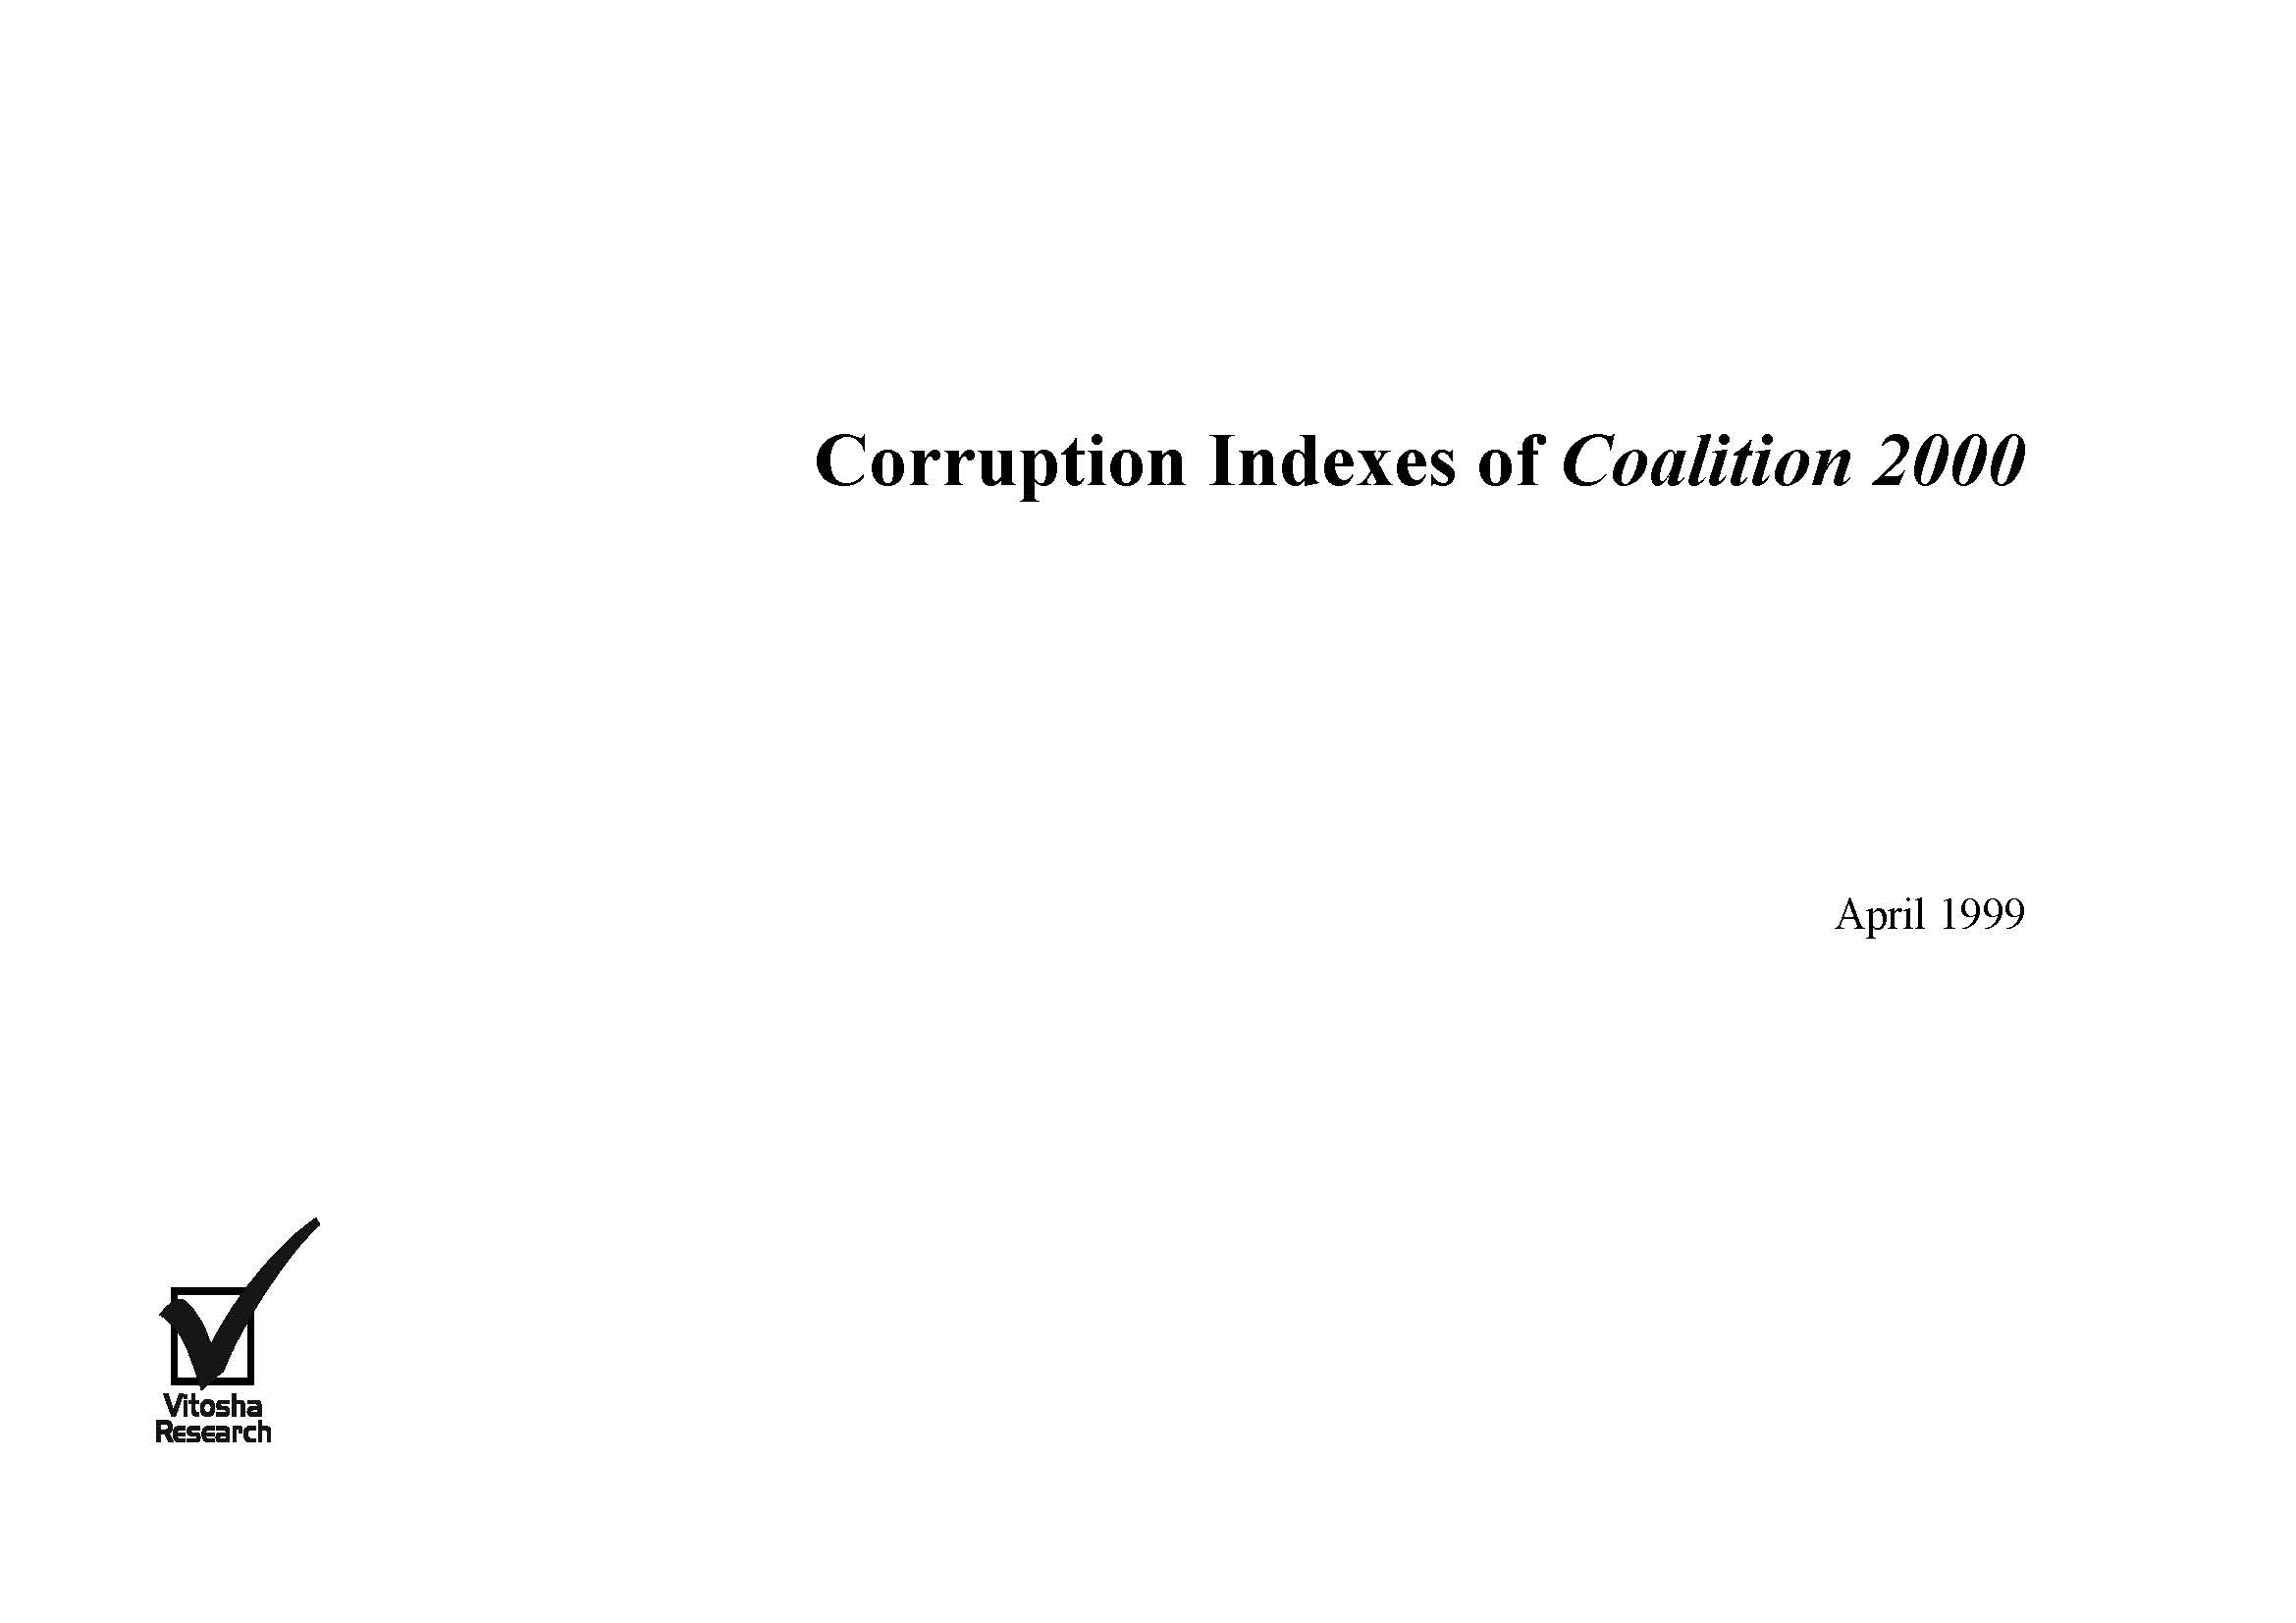 Corruption indices of Coalition 2000, April 1999